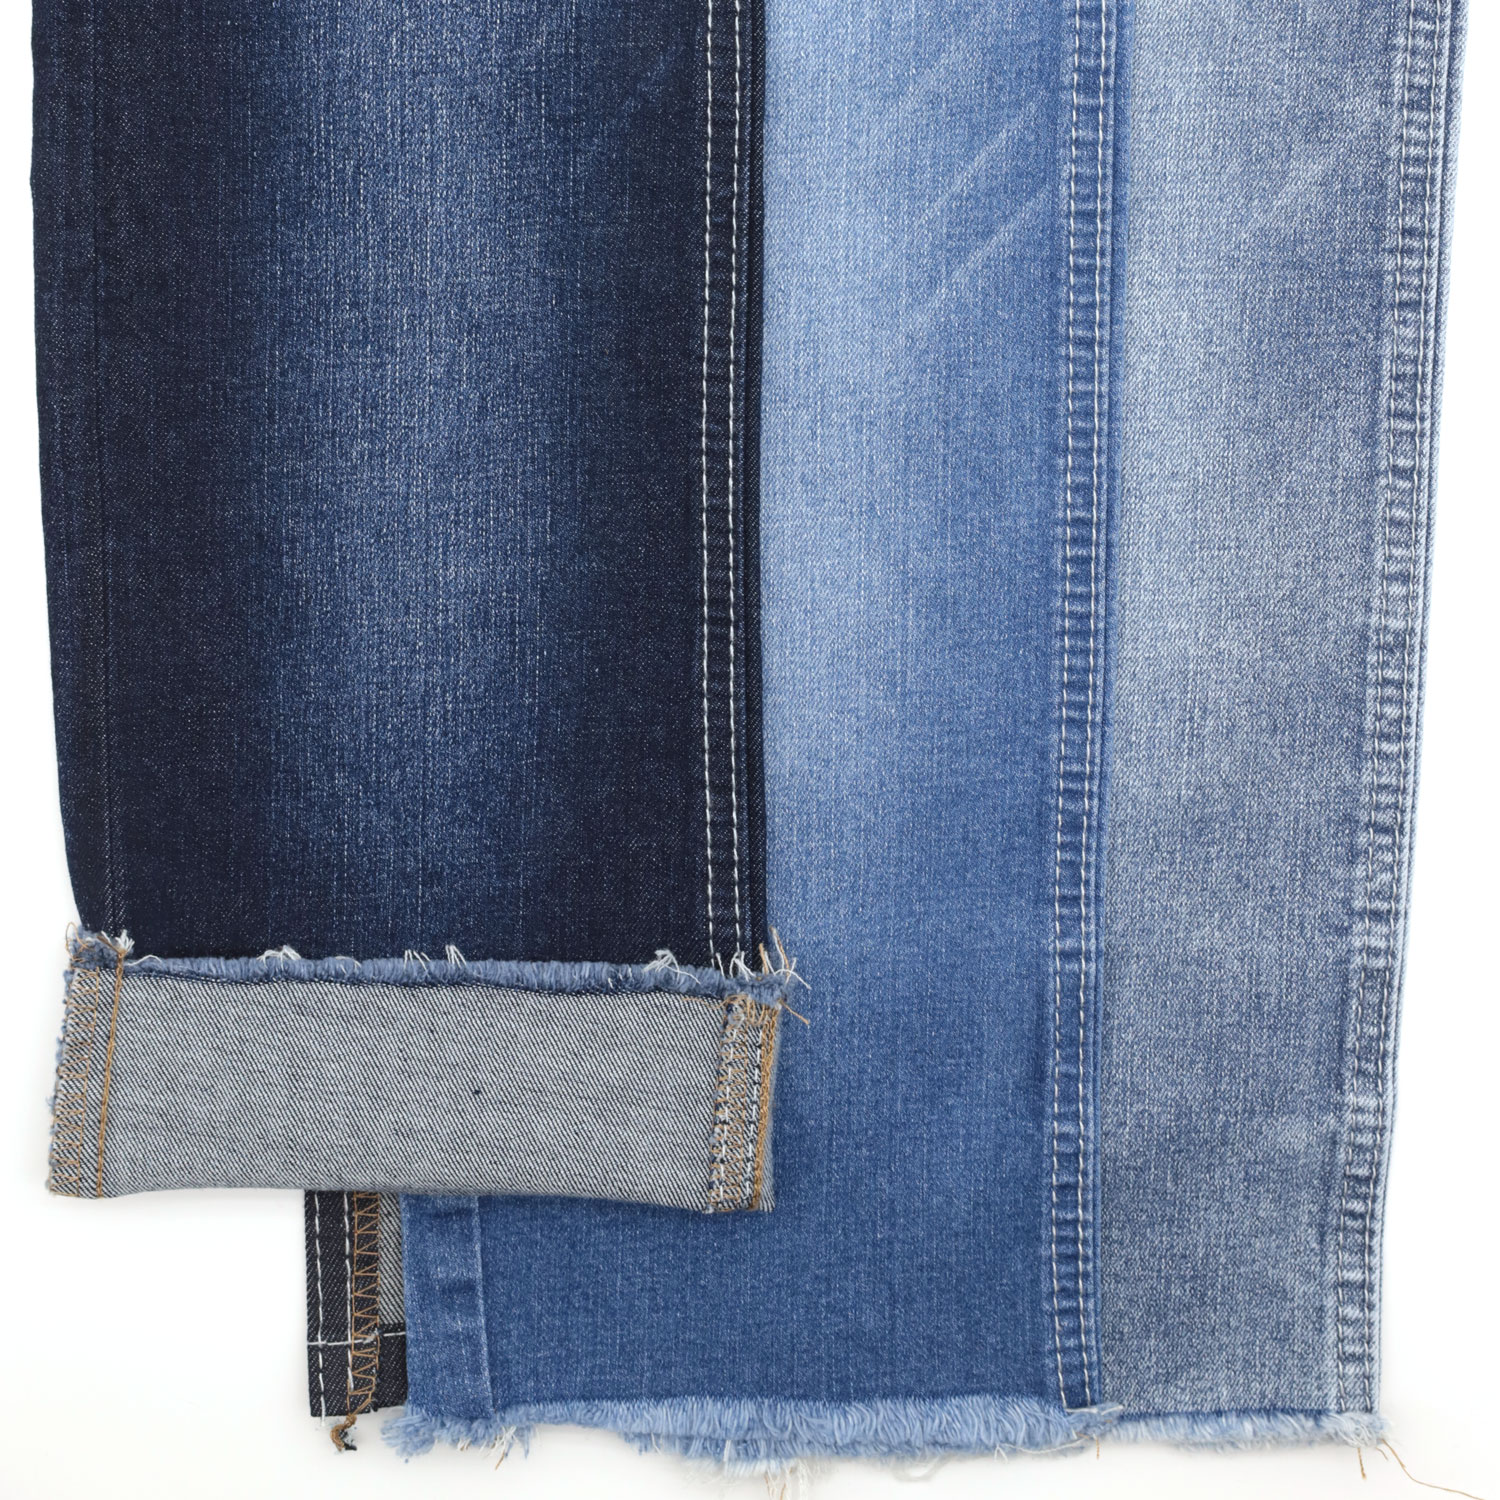 Inflatable China Denim Fabric  Types, Design and Benefits 1